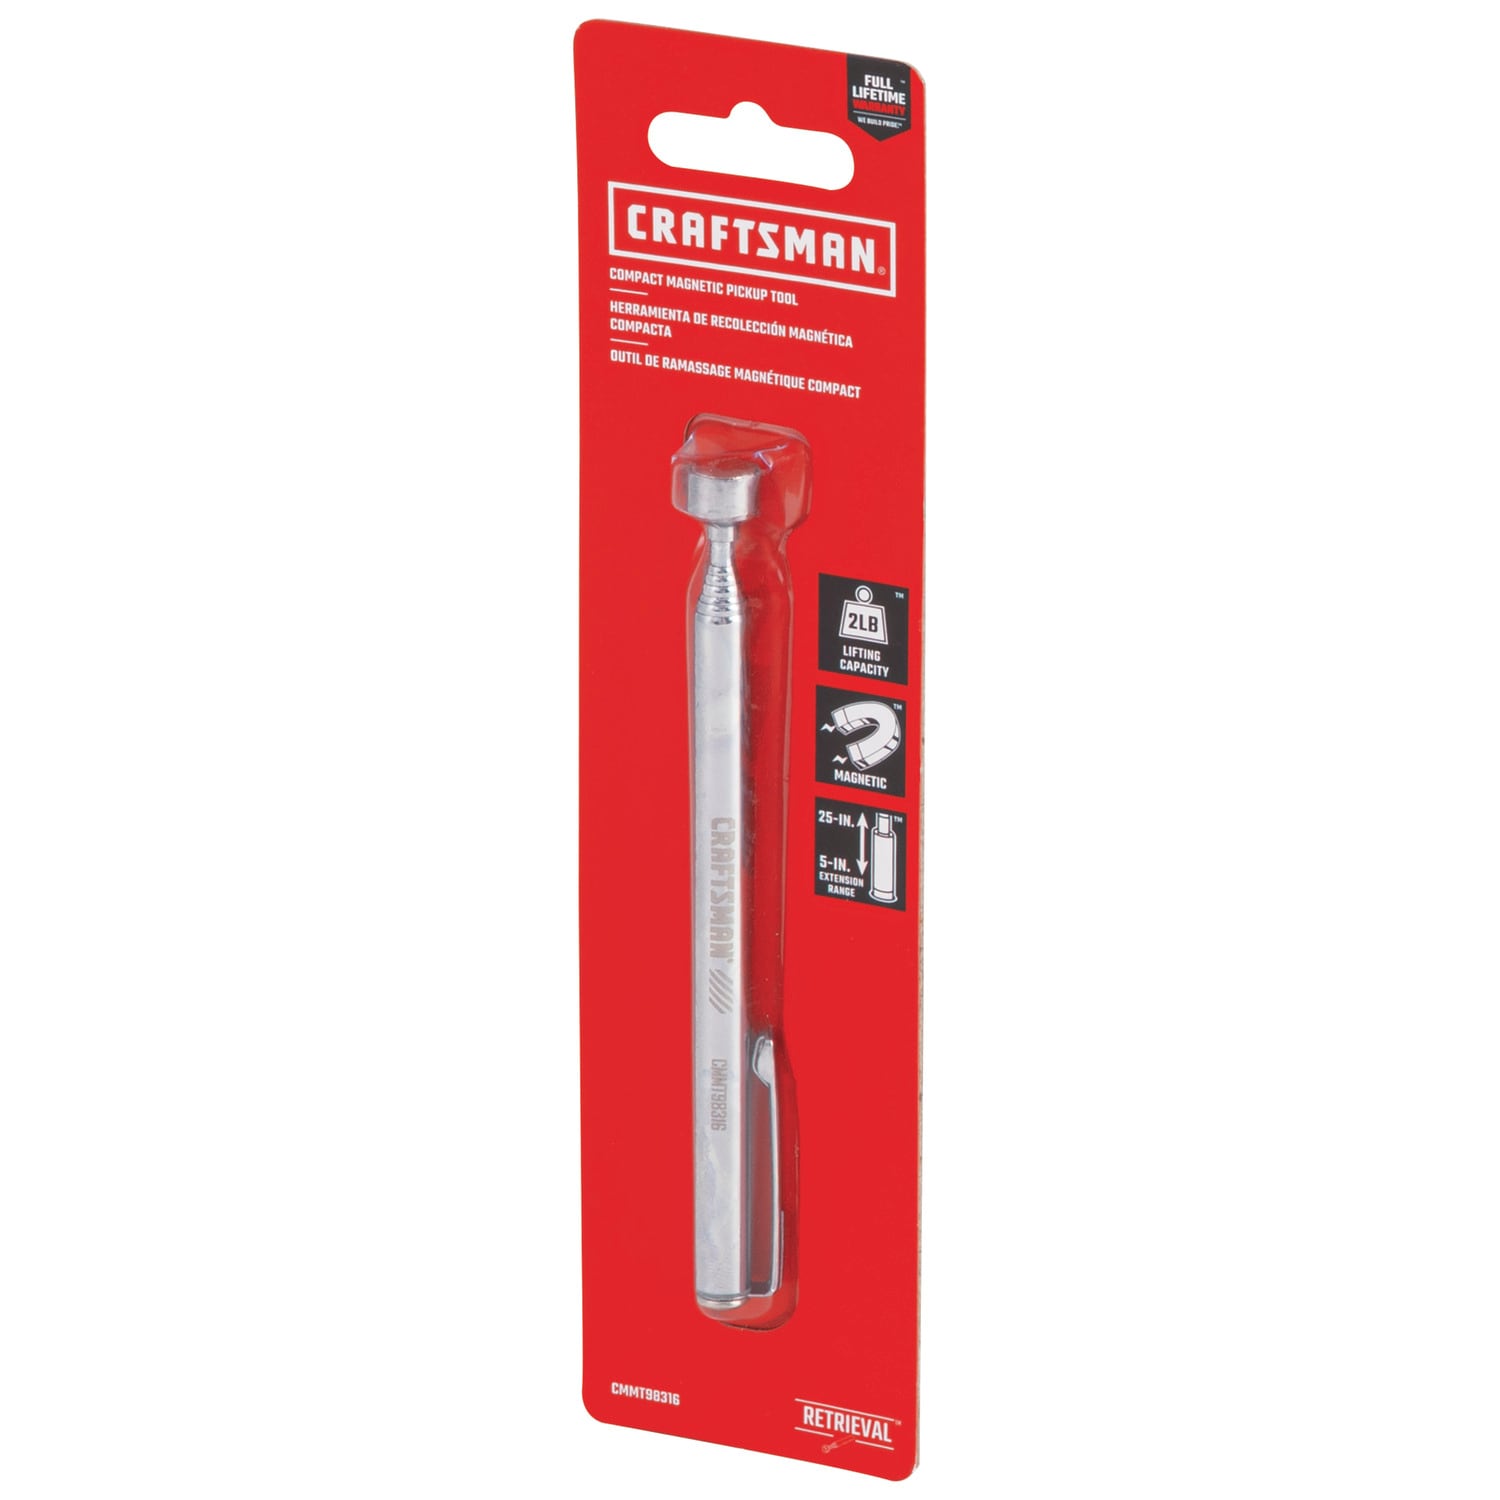 CRAFTSMAN Automotive Telescoping Magnet Tool in the Automotive